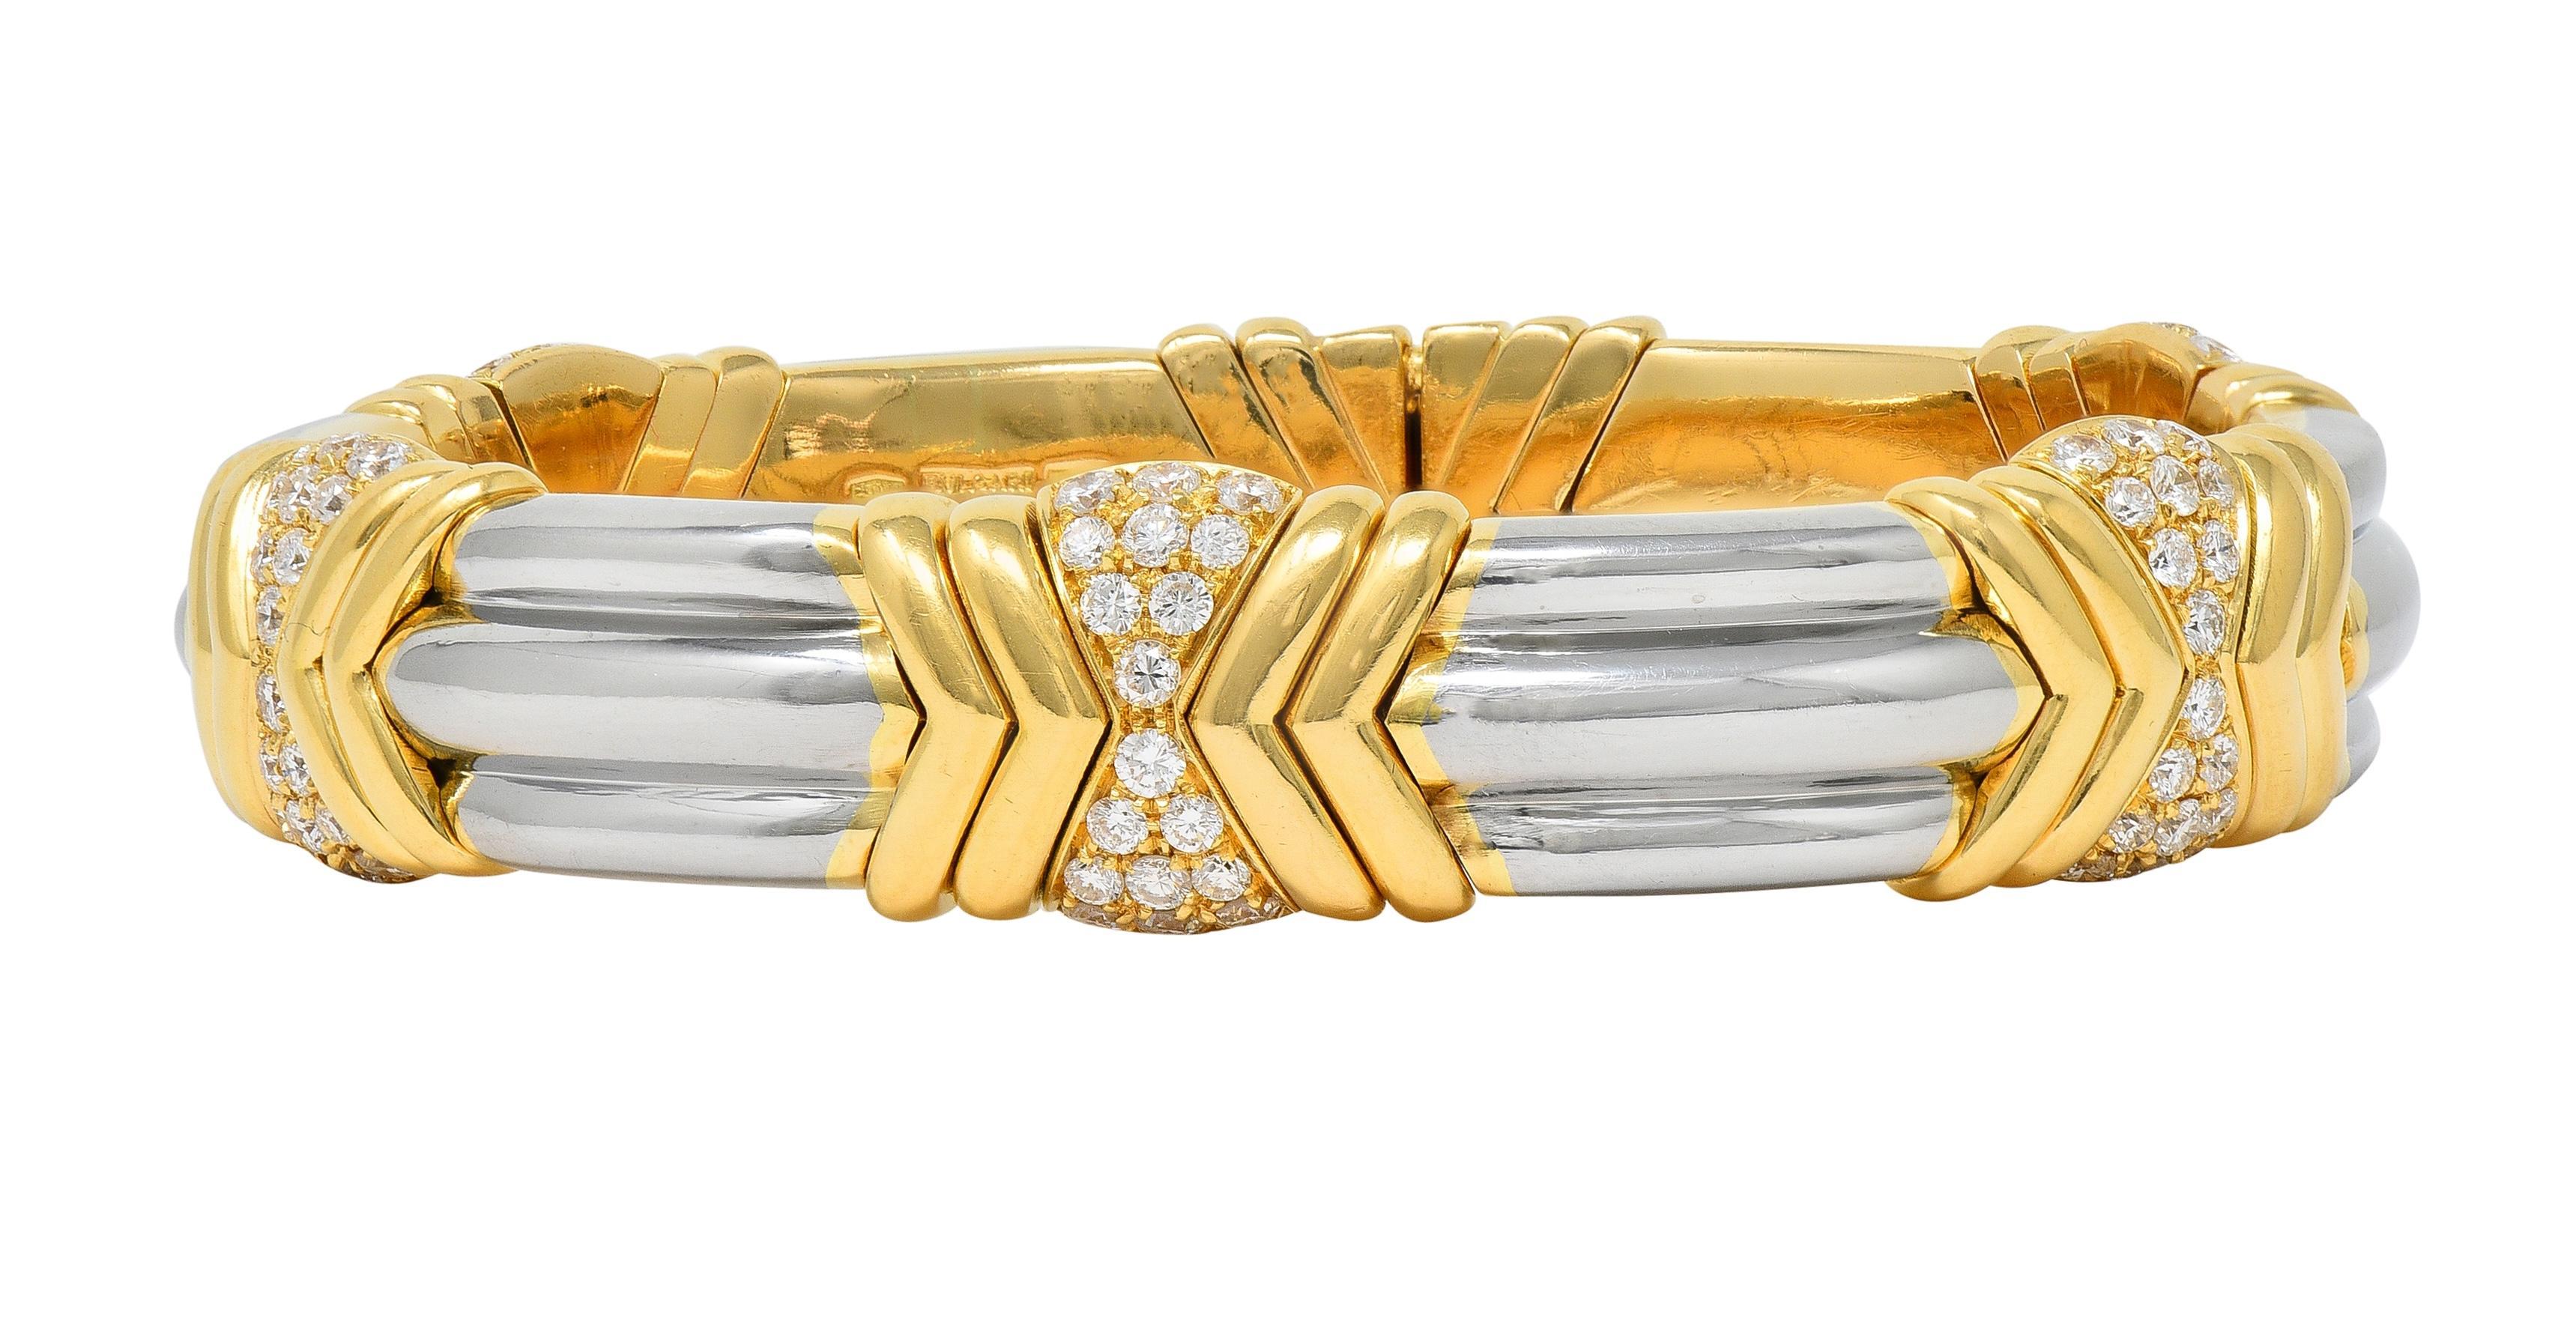 Comprised of segments of alternating ridged stainless steel and yellow gold stations 
Featuring a chevron motif with pavé set round brilliant cut diamond centers
Weighing approximately 2.60 carats total - G color with VS2 clarity 
With considerable